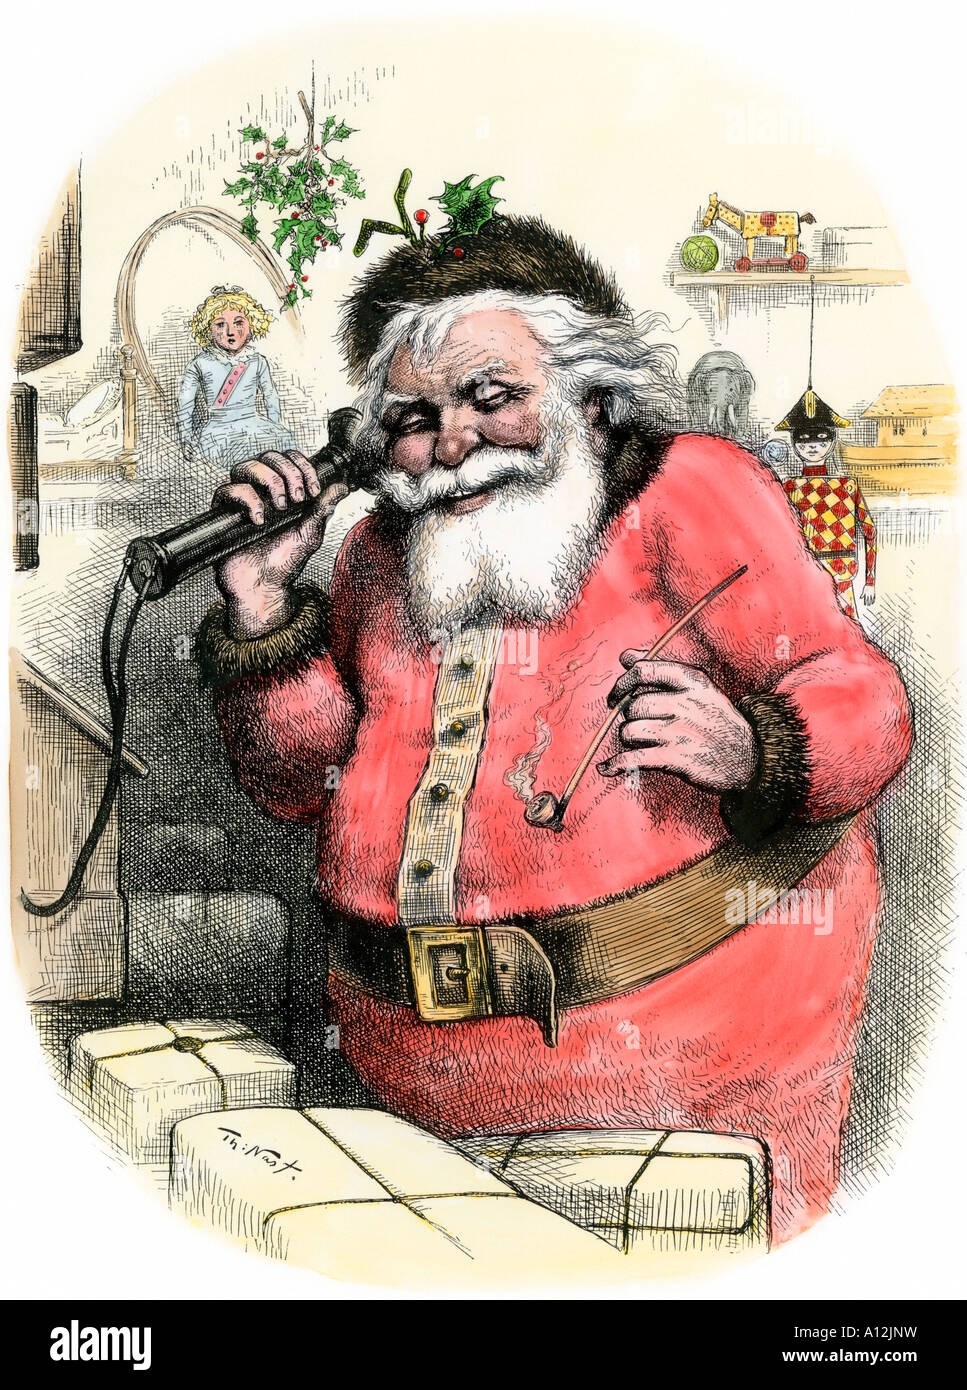 Santa Claus speaking to a child on the telephone Hello Little One 1880s. Hand-colored woodcut of a Thomas Nast illustration Stock Photo